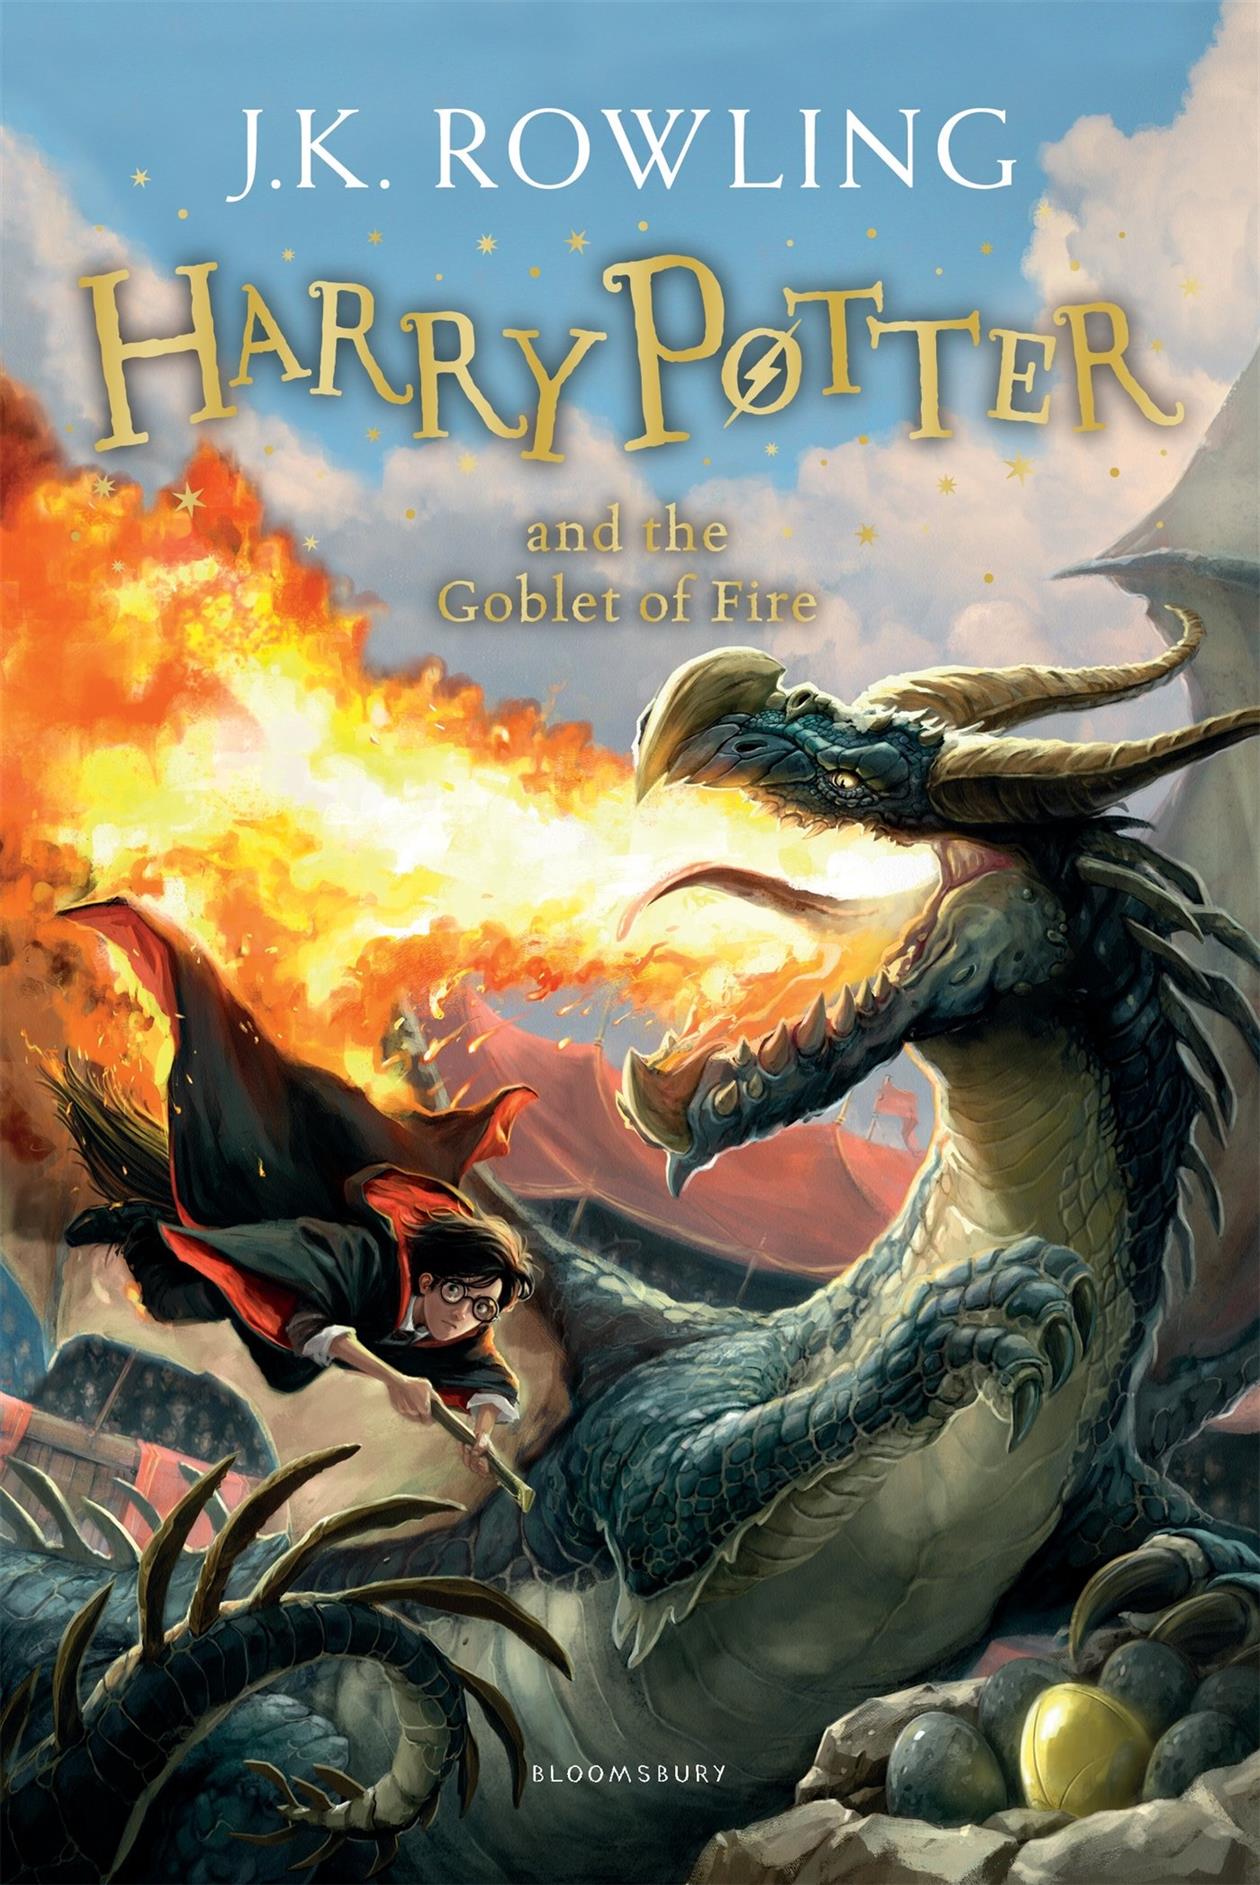 Harry Potter and the Goblet of Fire Novel by J. K. Rowling